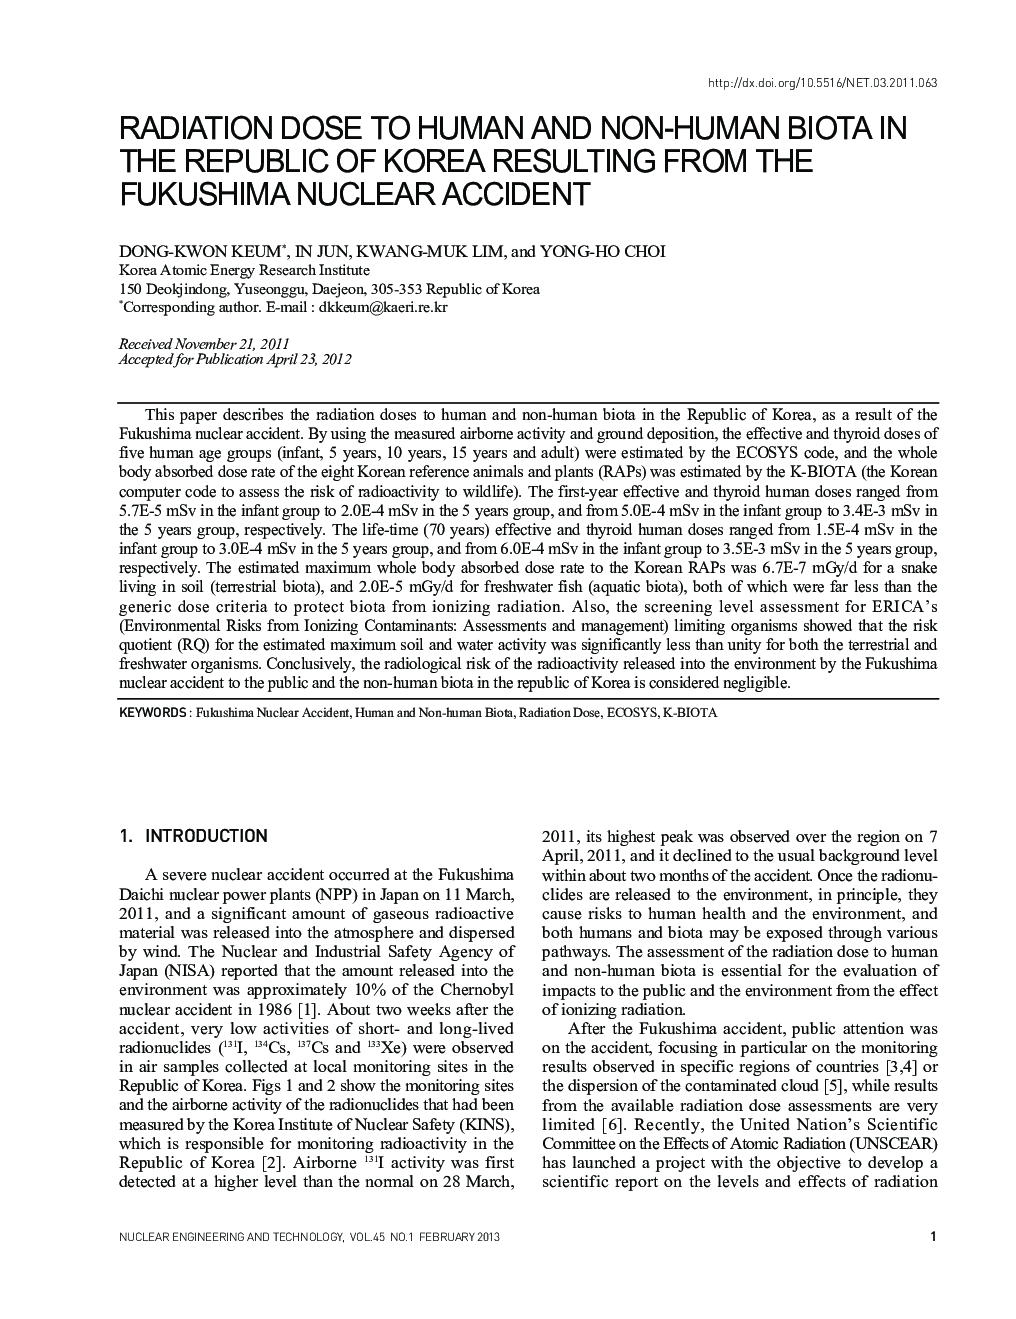 RADIATION DOSE TO HUMAN AND NON-HUMAN BIOTA IN THE REPUBLIC OF KOREA RESULTING FROM THE FUKUSHIMA NUCLEAR ACCIDENT